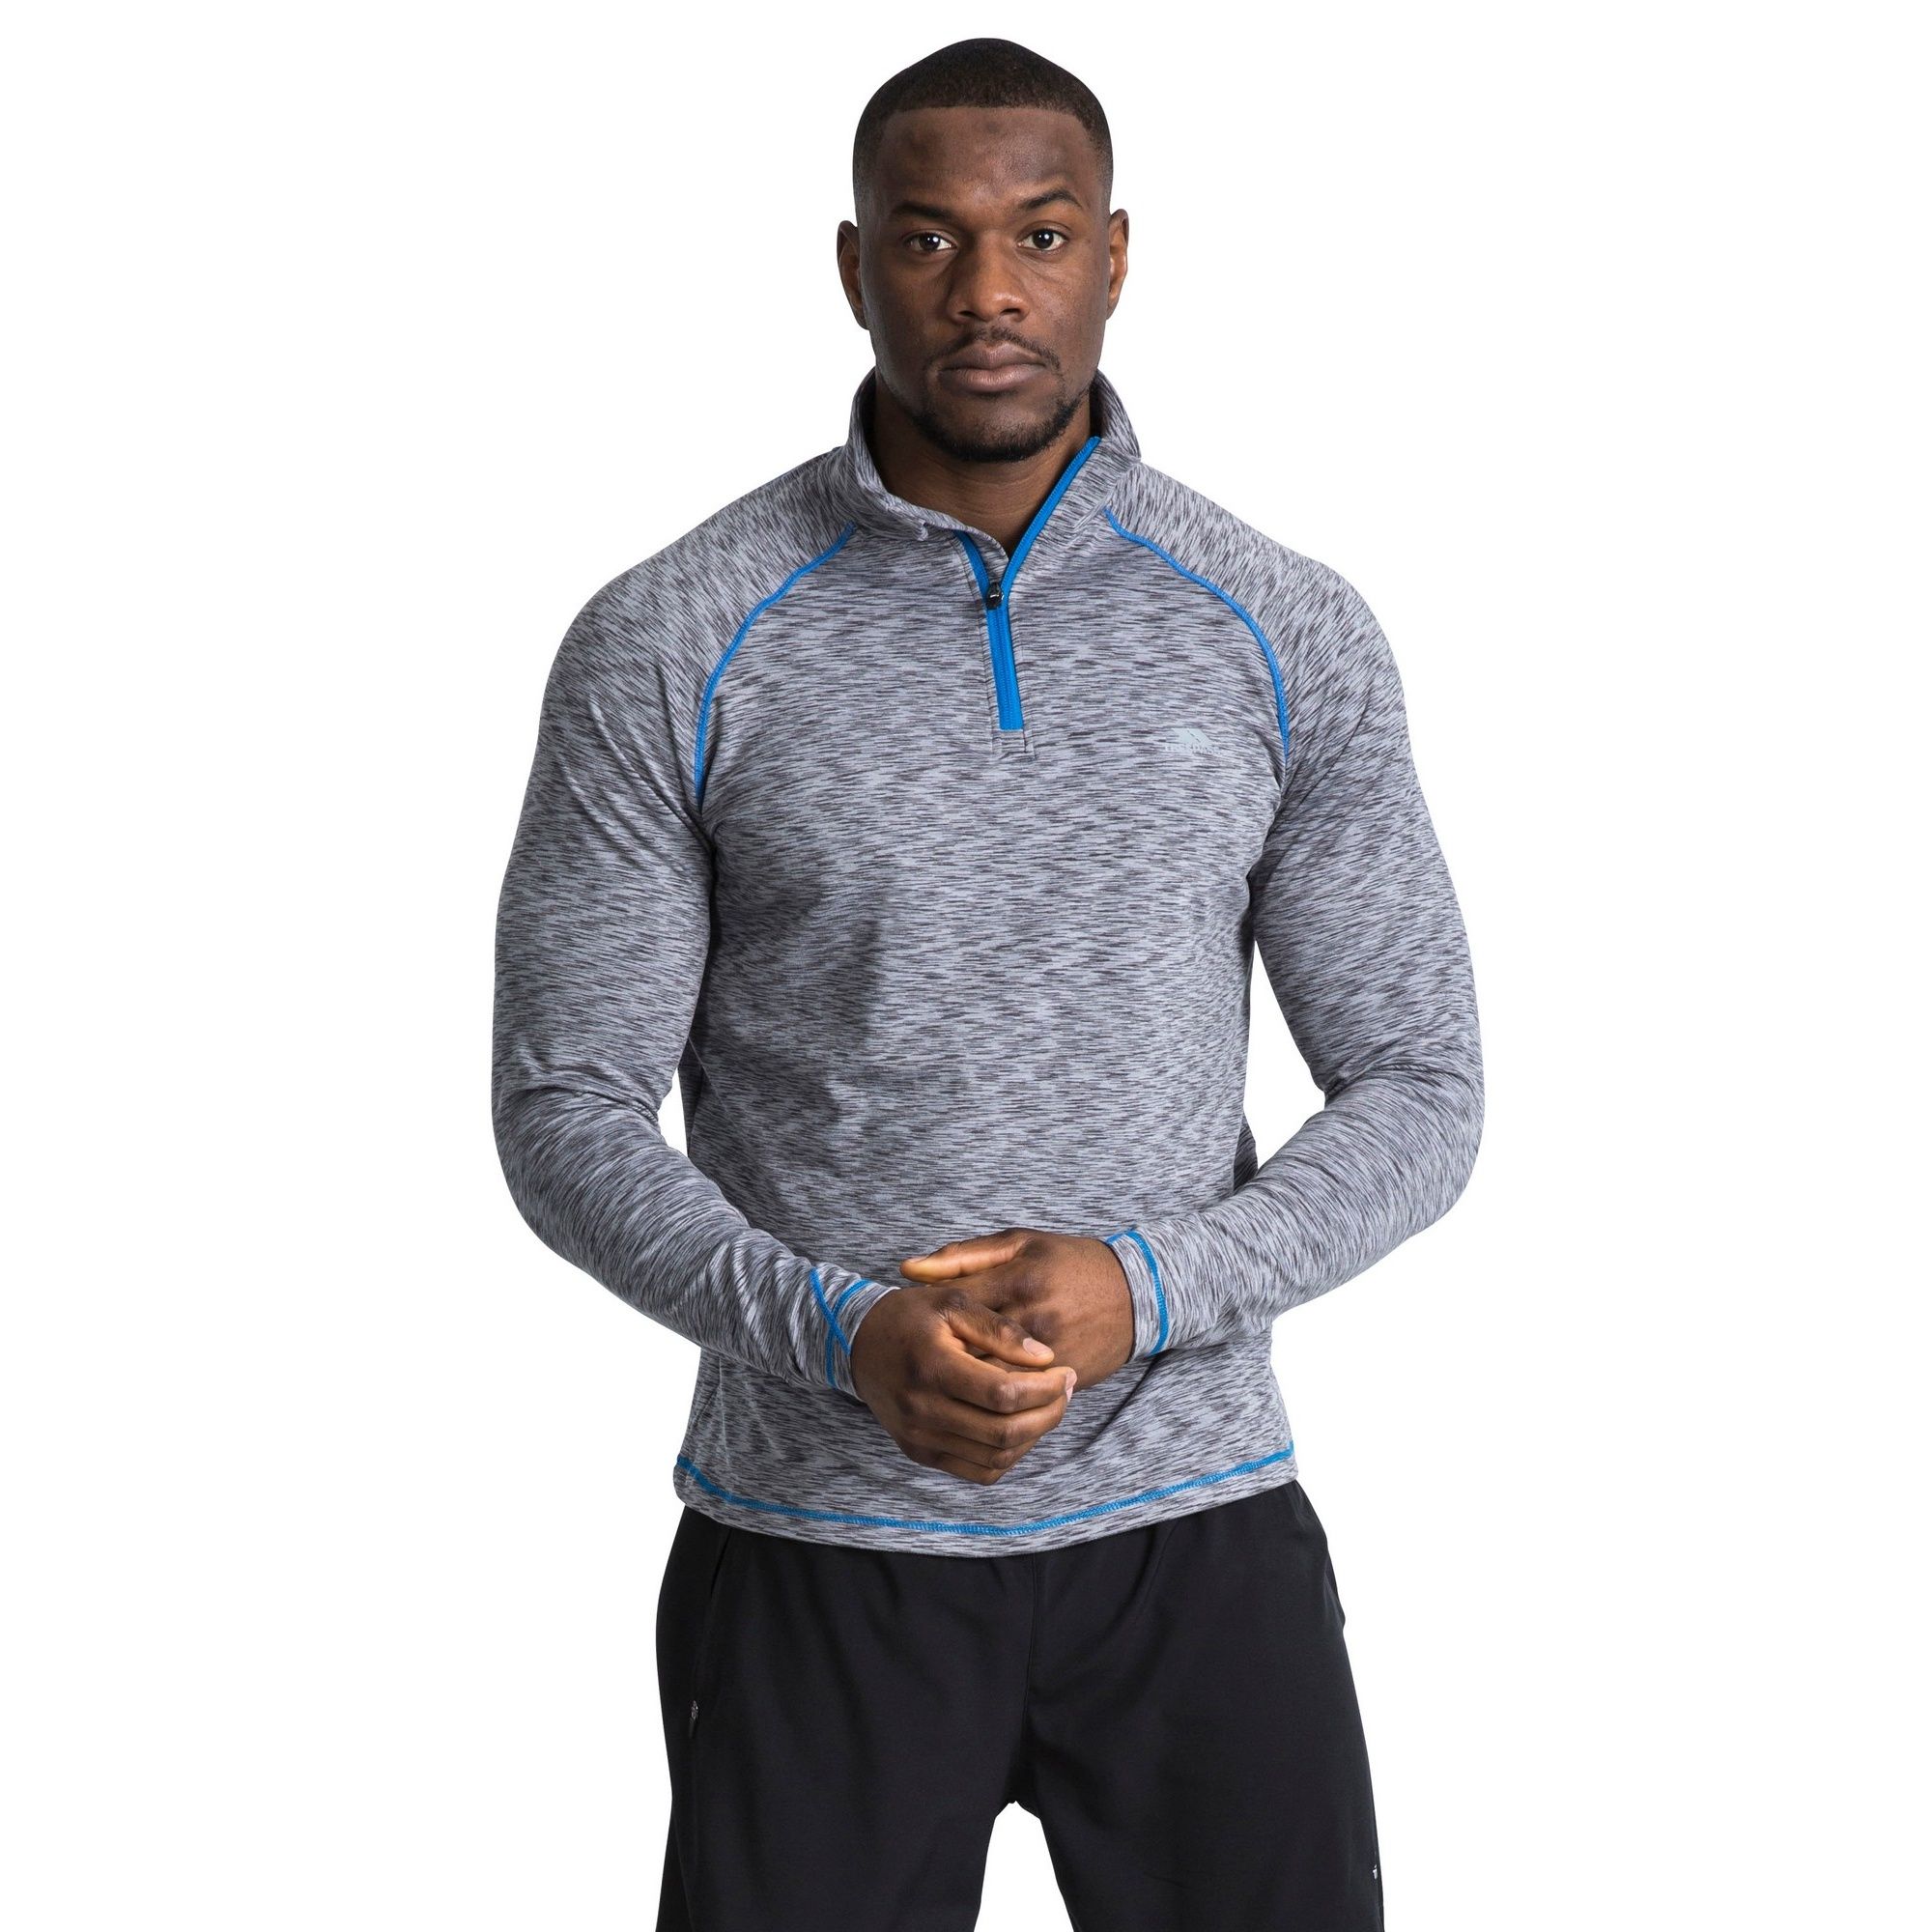 1/2 zip. Long sleeve. Contrast flat seams. Reflective printed logos. Small rear zip pocket.  finish. Wicking. Quick dry. 86% Polyester/14% Elastane. Trespass Mens Chest Sizing (approx): S - 35-37in/89-94cm, M - 38-40in/96.5-101.5cm, L - 41-43in/104-109cm, XL - 44-46in/111.5-117cm, XXL - 46-48in/117-122cm, 3XL - 48-50in/122-127cm.